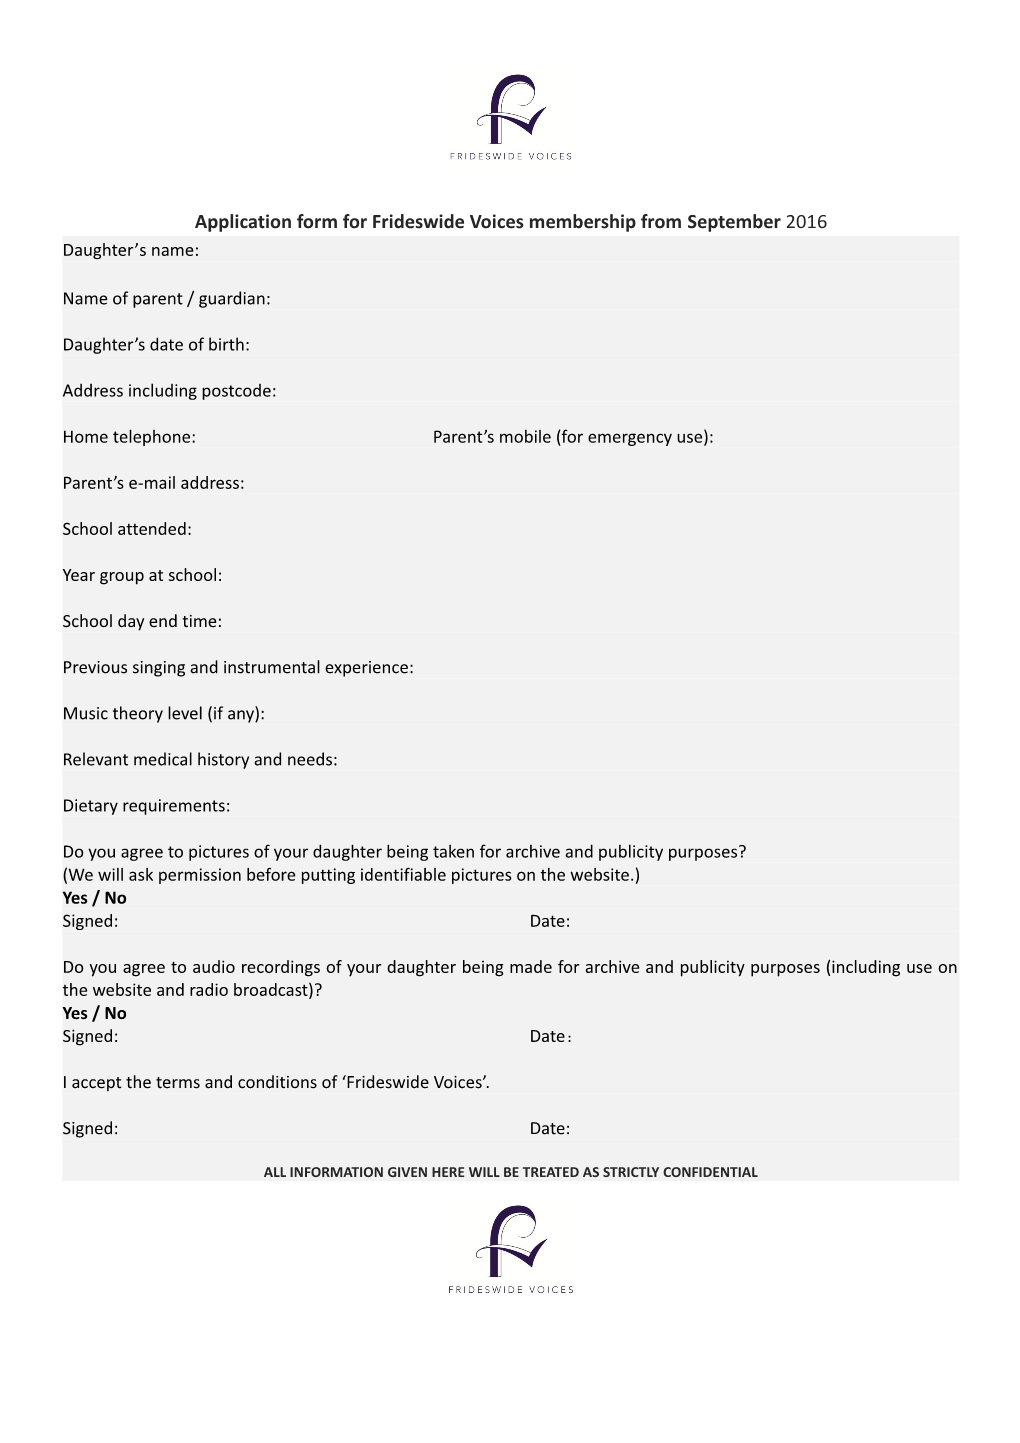 Application Form for Frideswide Voices Membership from September 2016